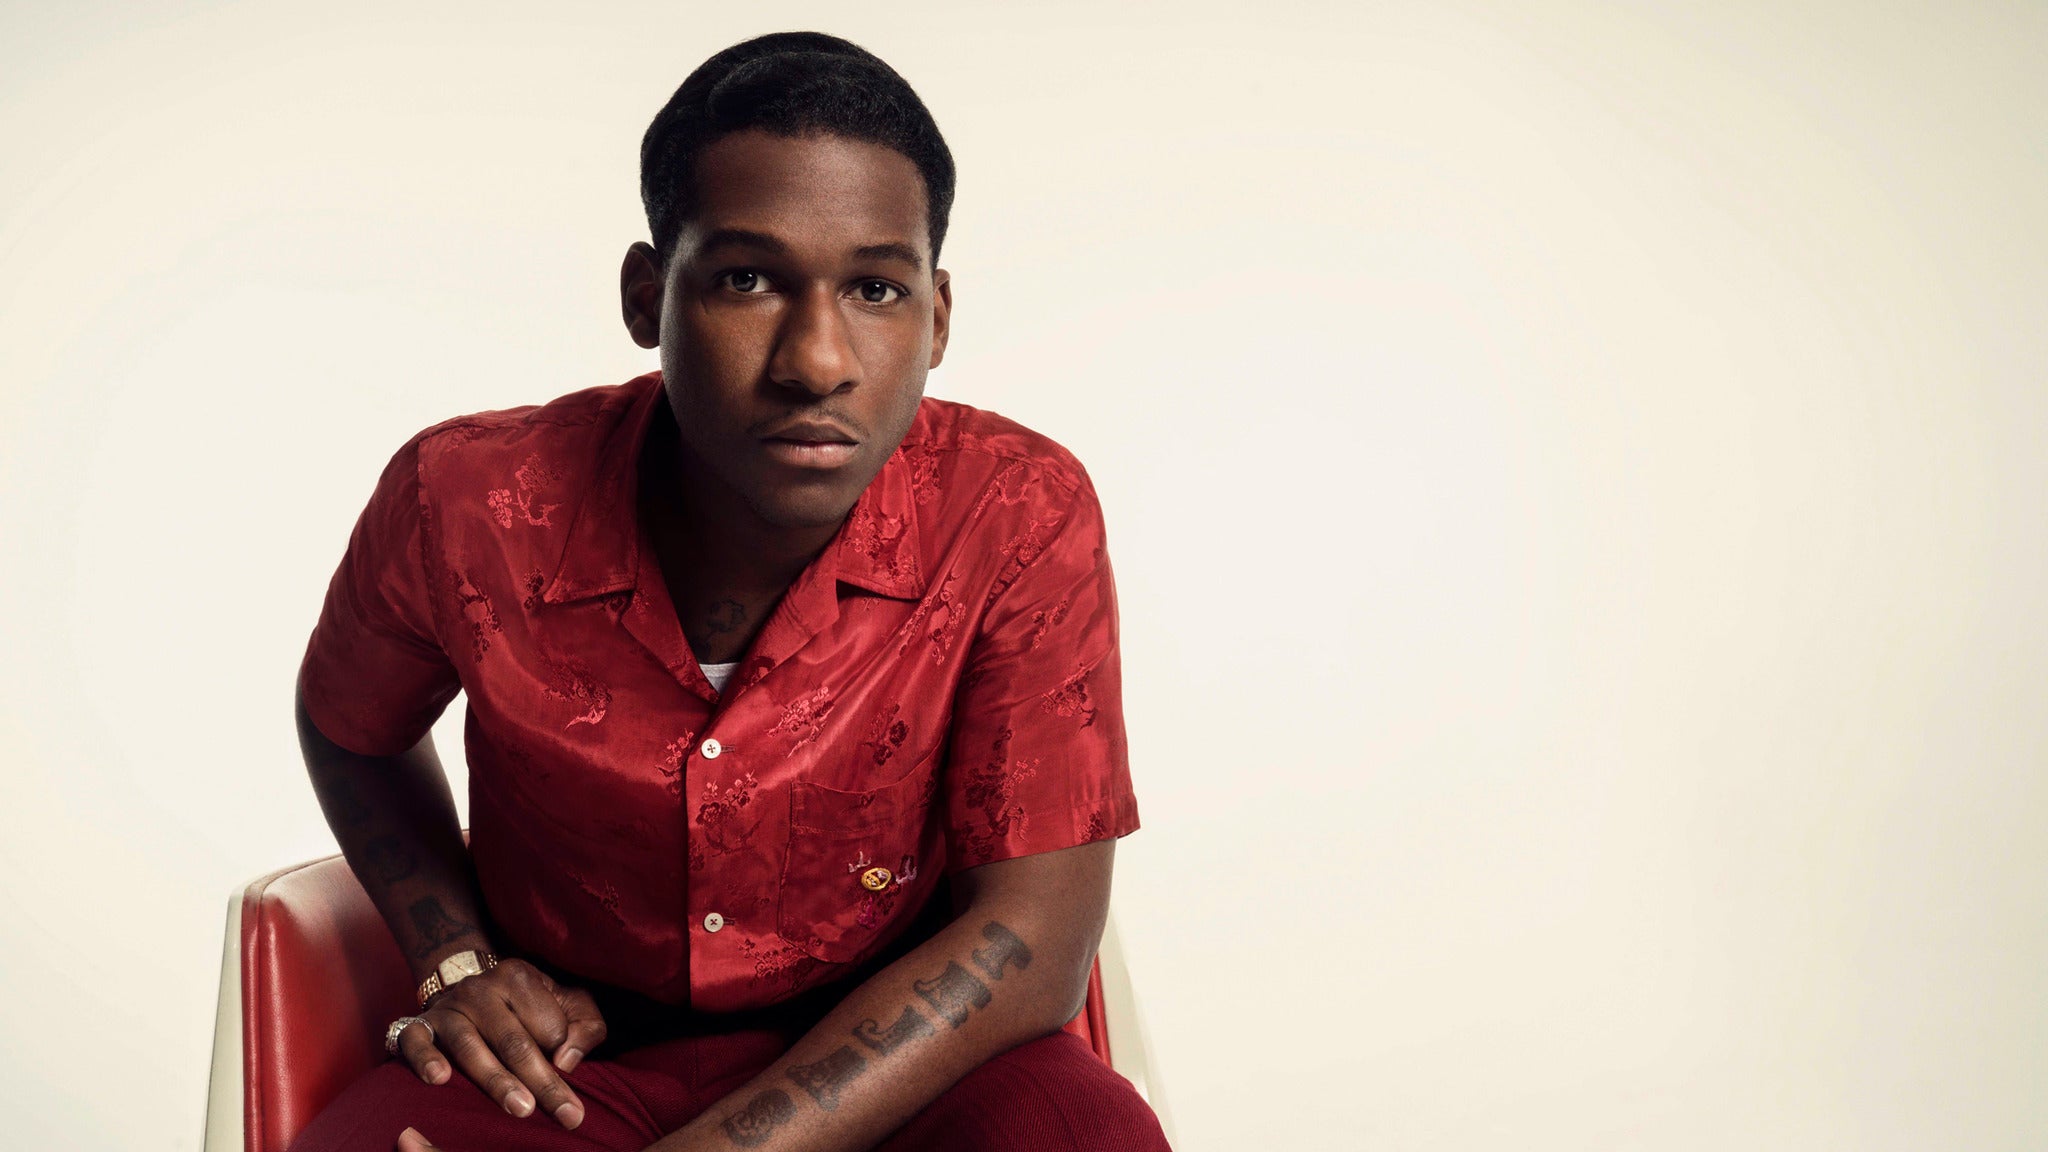 Image used with permission from Ticketmaster | Leon Bridges tickets